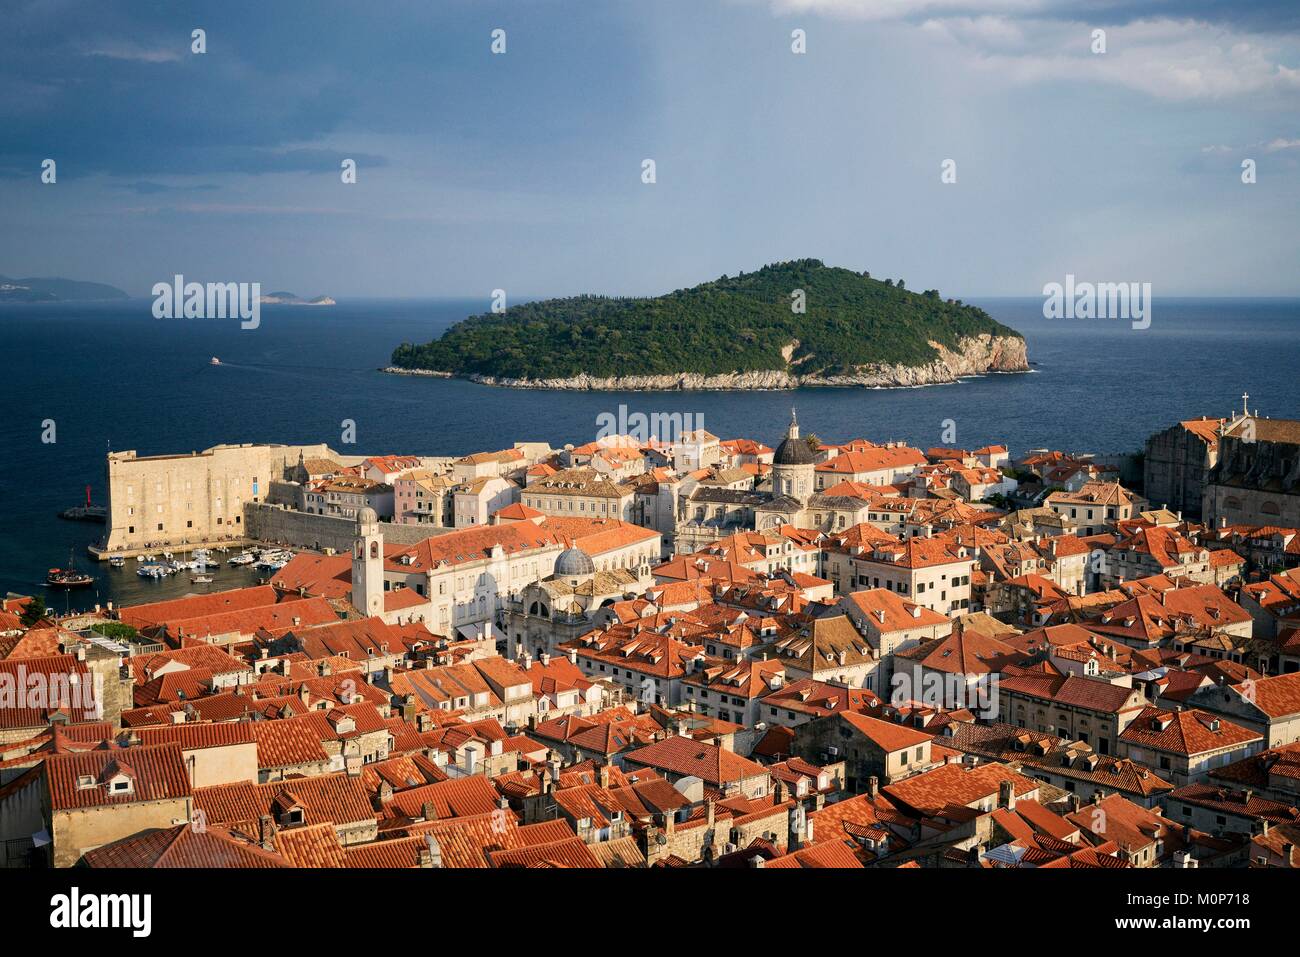 Croatia,Dalmatia,Dalmatian Coast,Dubrovnik,historical centre listed as World Heritage by UNESCO,city rooftops and the dome of the Assumption cathedral,Lokrum island in the distance Stock Photo